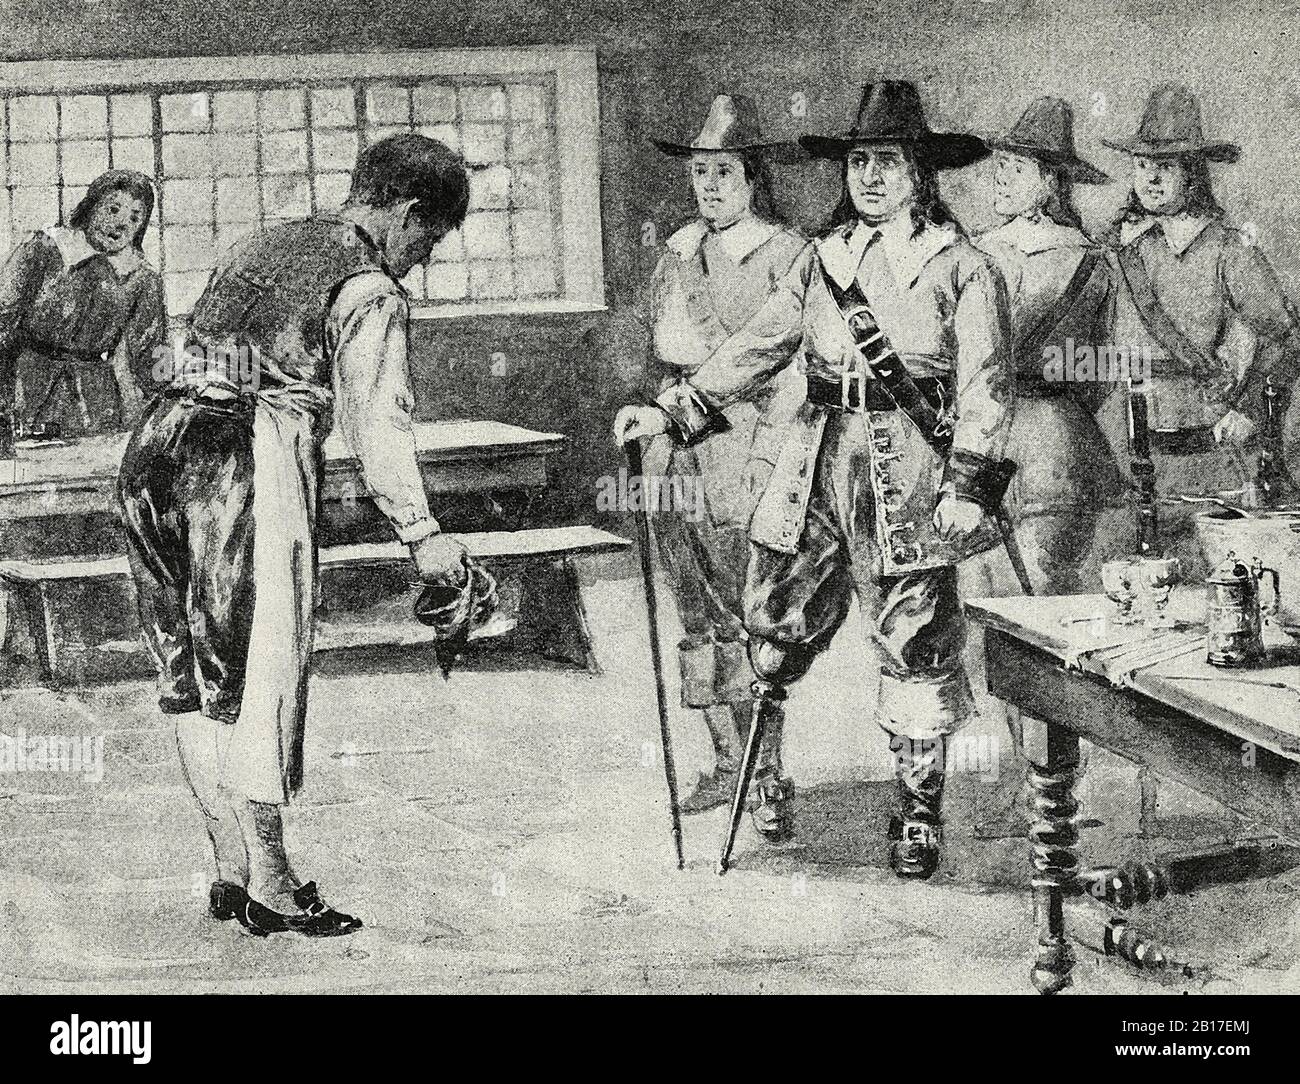 Governor Stuyvesant Inspecting Taverns in New Amsterdam in the 1600s Stock Photo